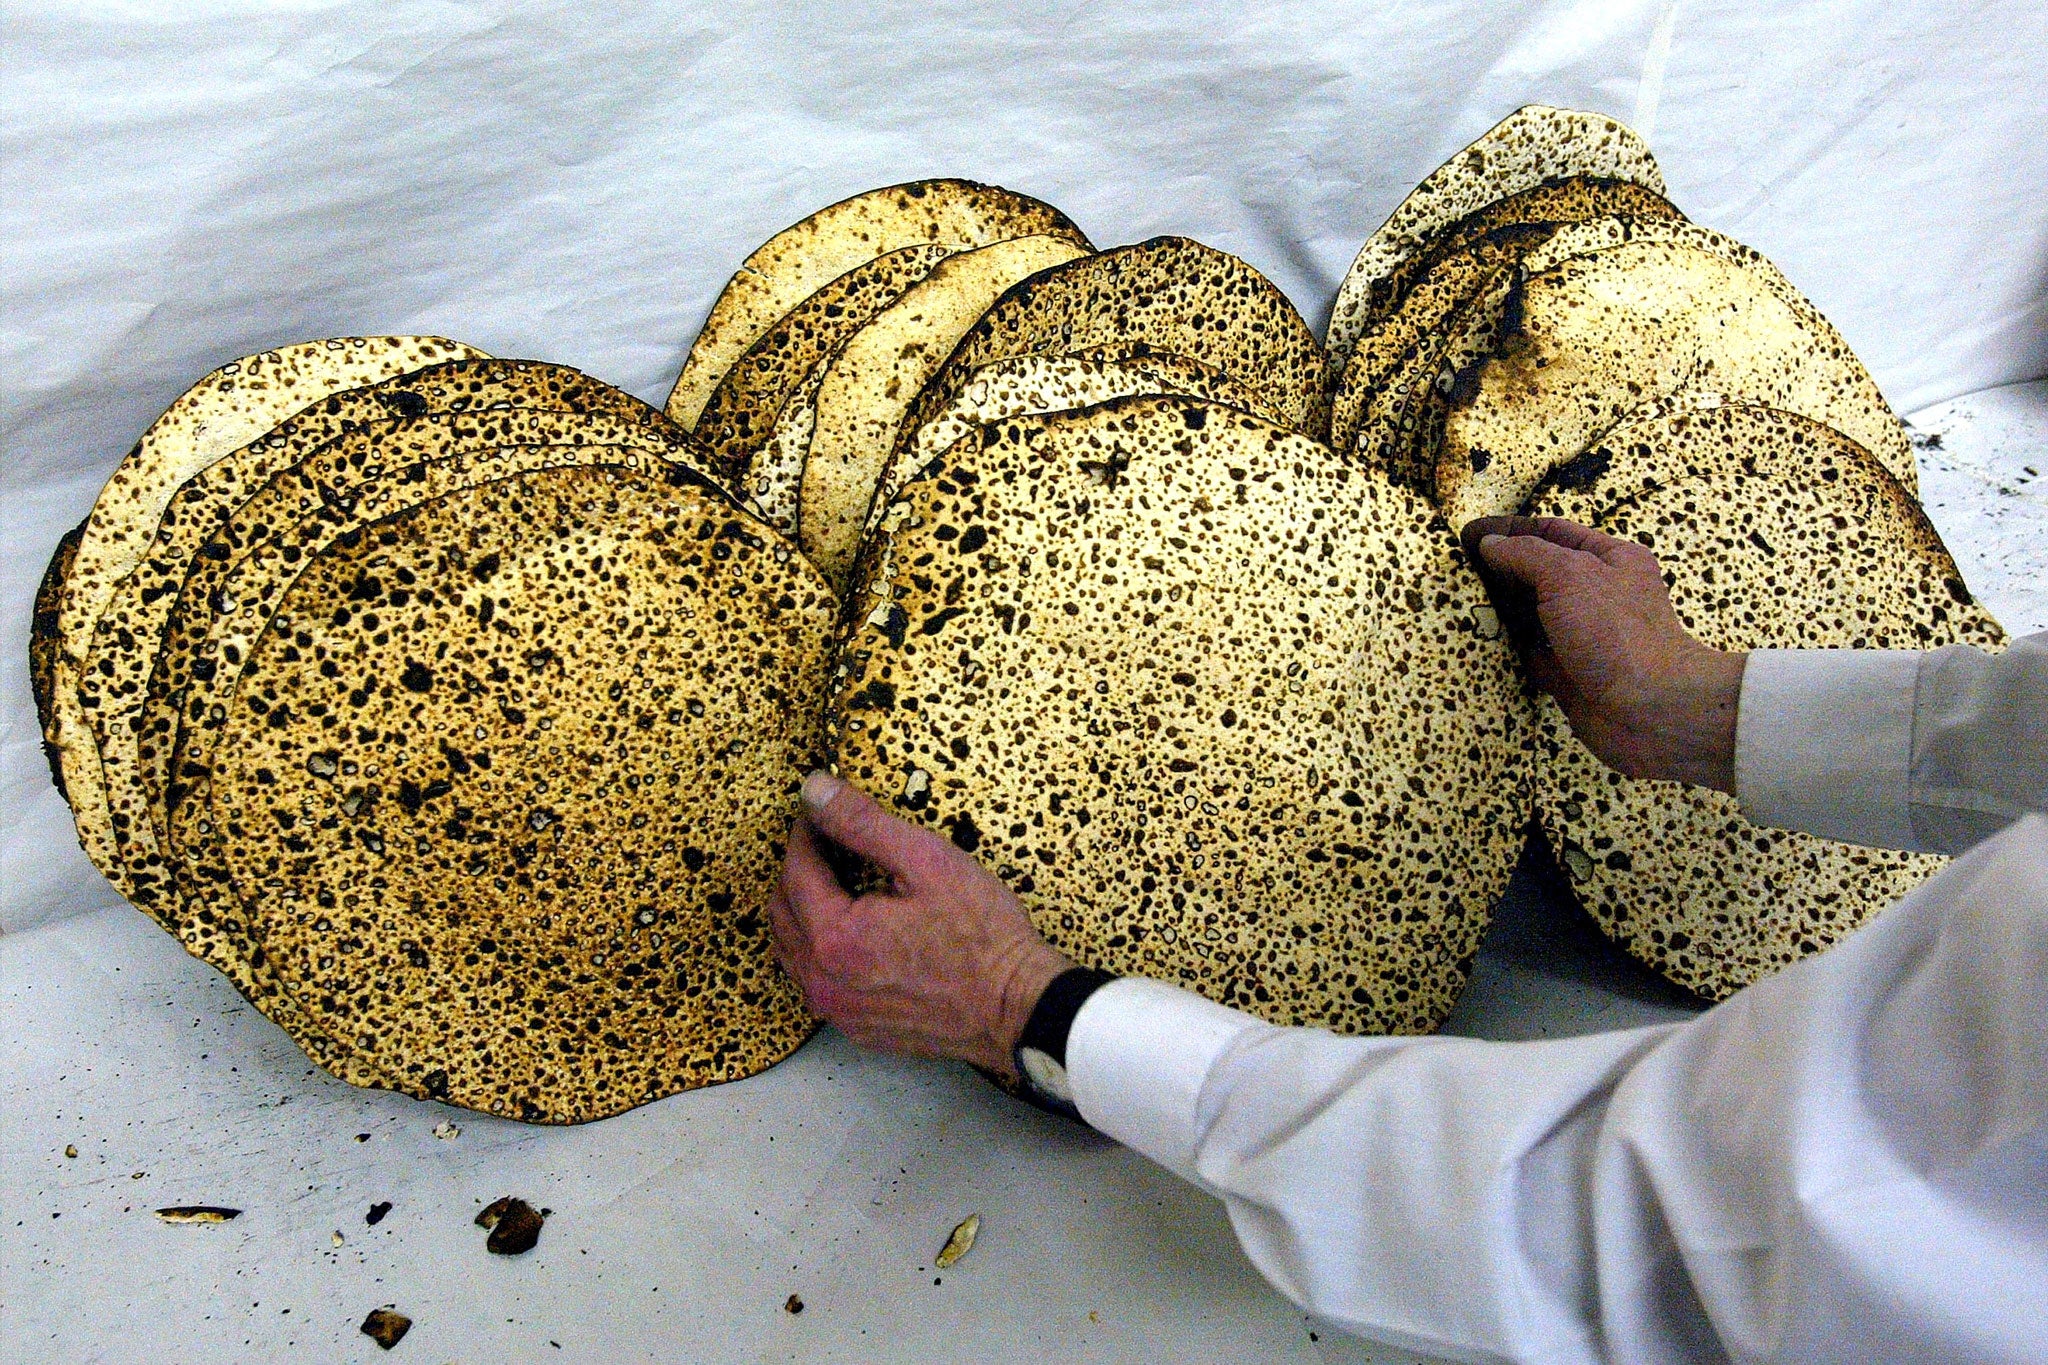 Unleavened bread is prepared for the night of Passover